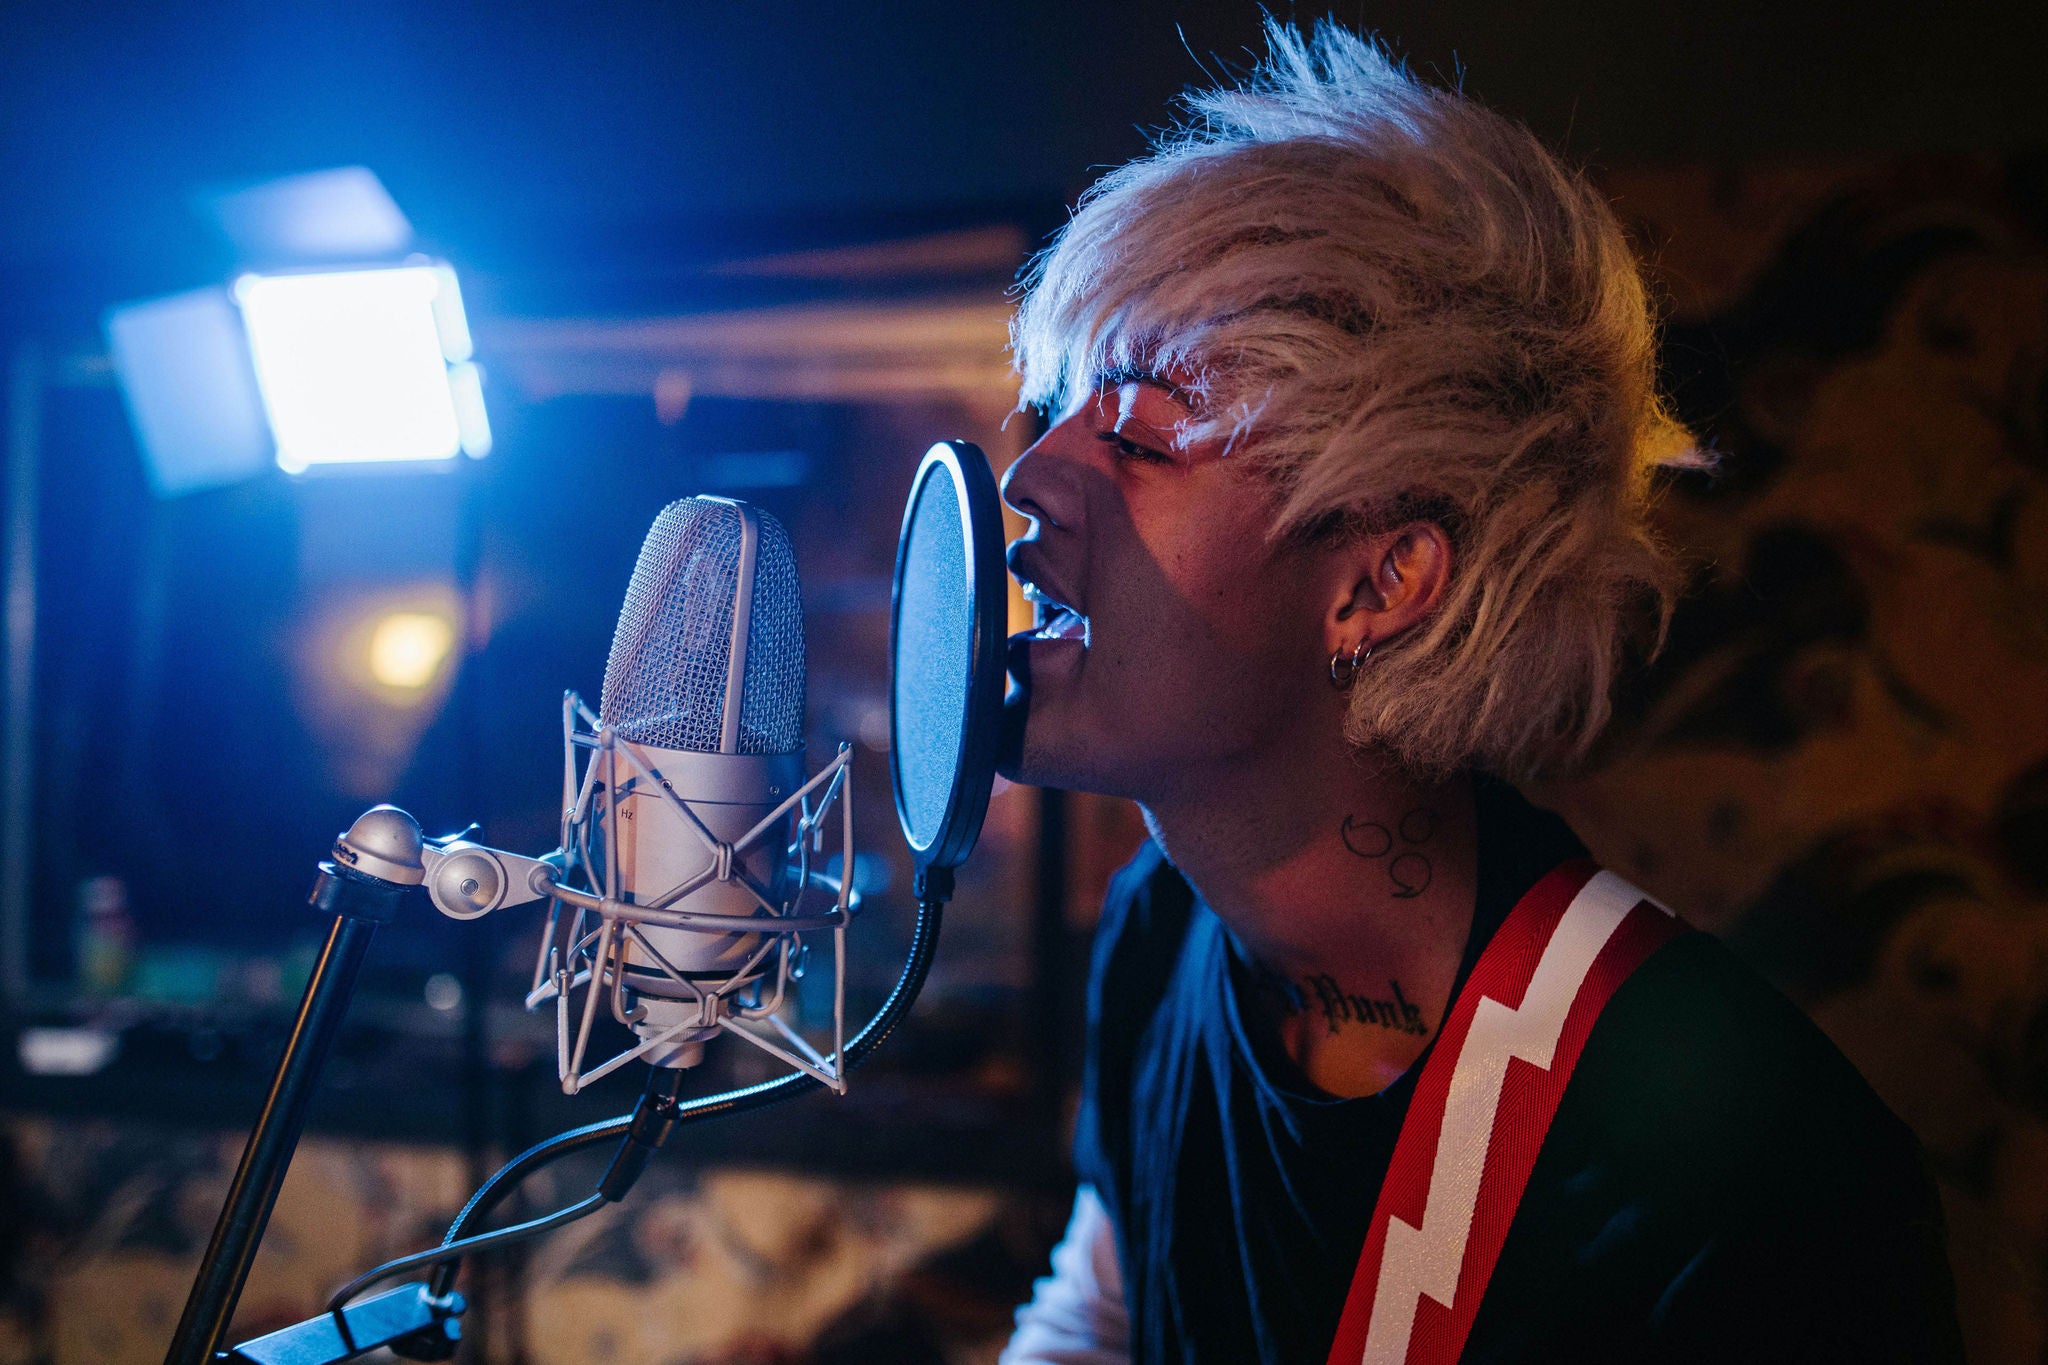 Blonde hipster singing into microphone in music studio, playaing guitar, Rodnae productions